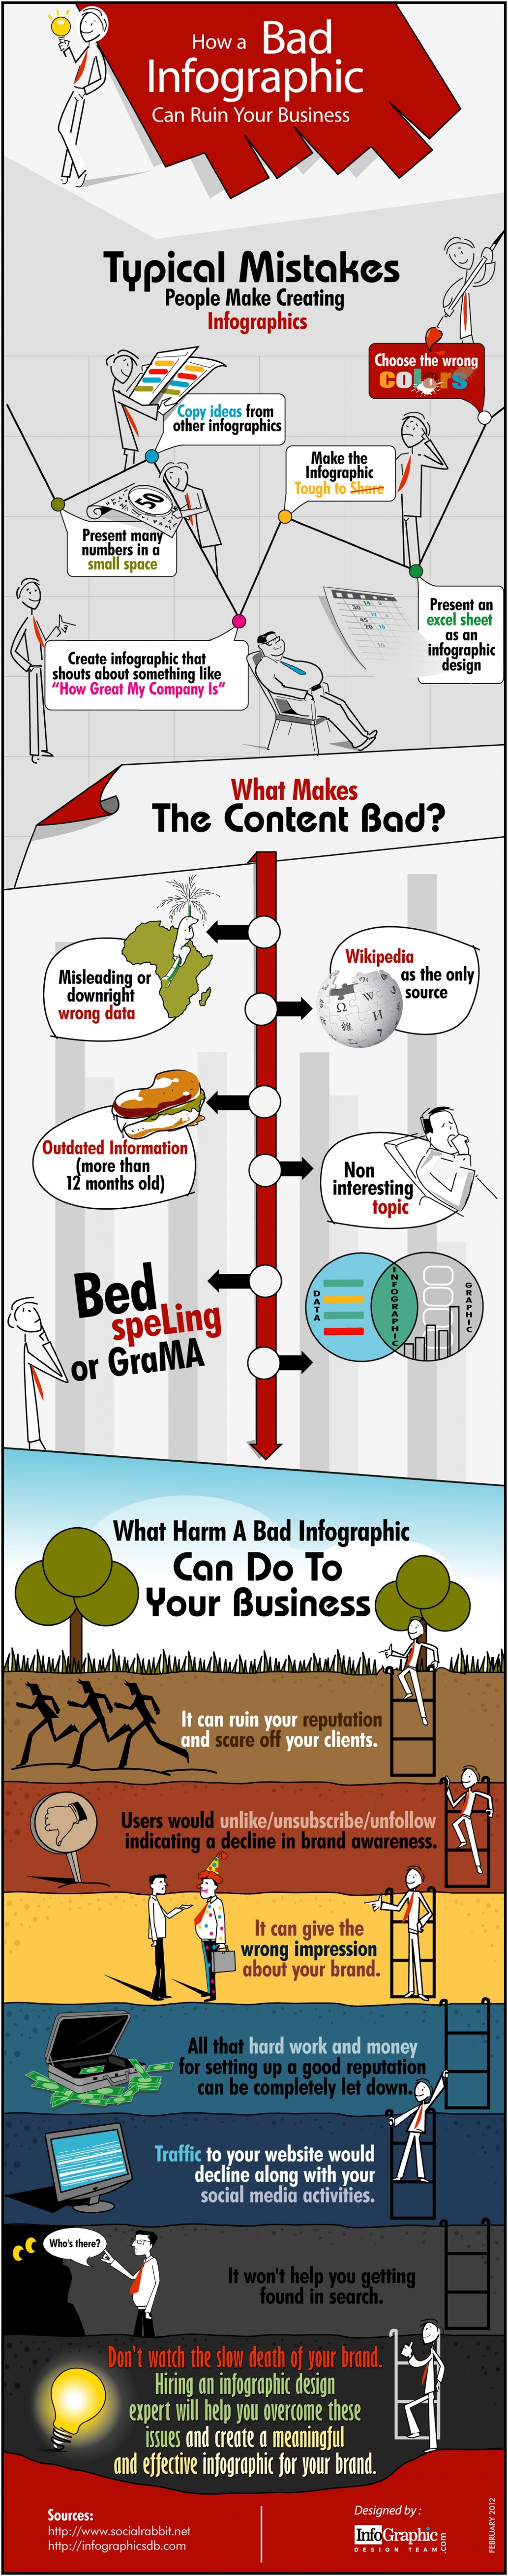 evil effects of bad infographics